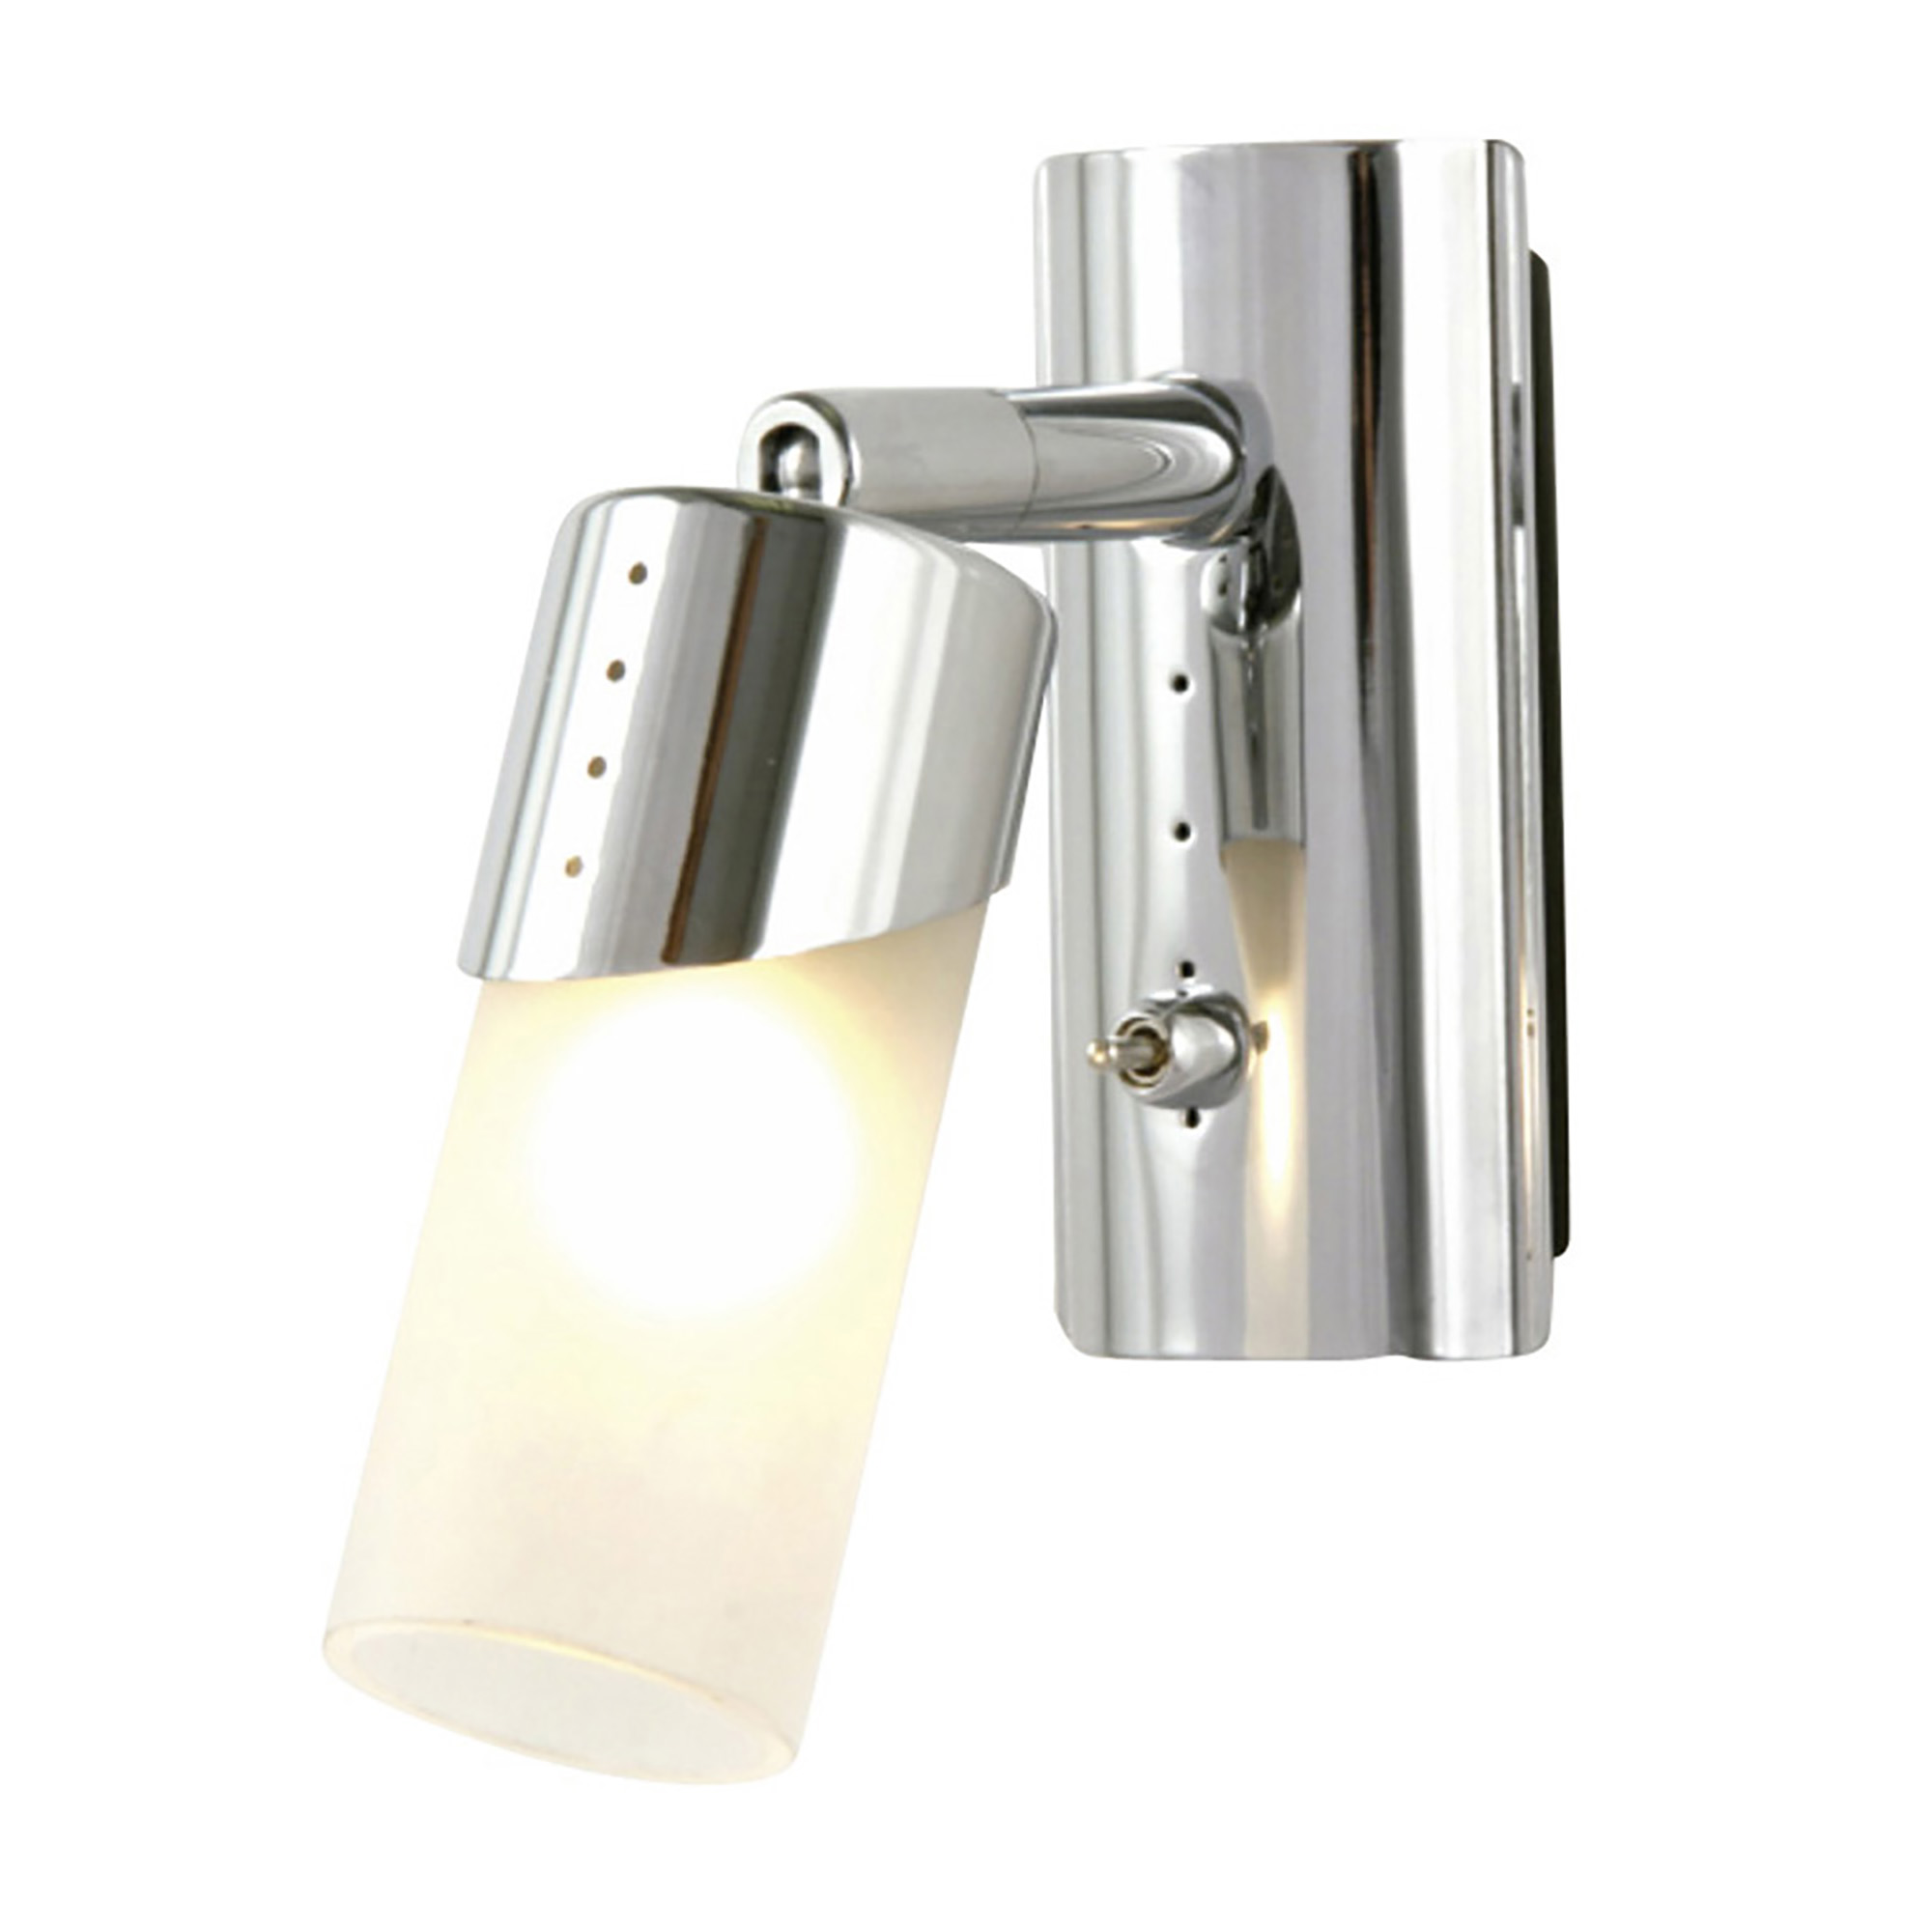 IL20140  Kopus Wall Lamp Switched 1 Light